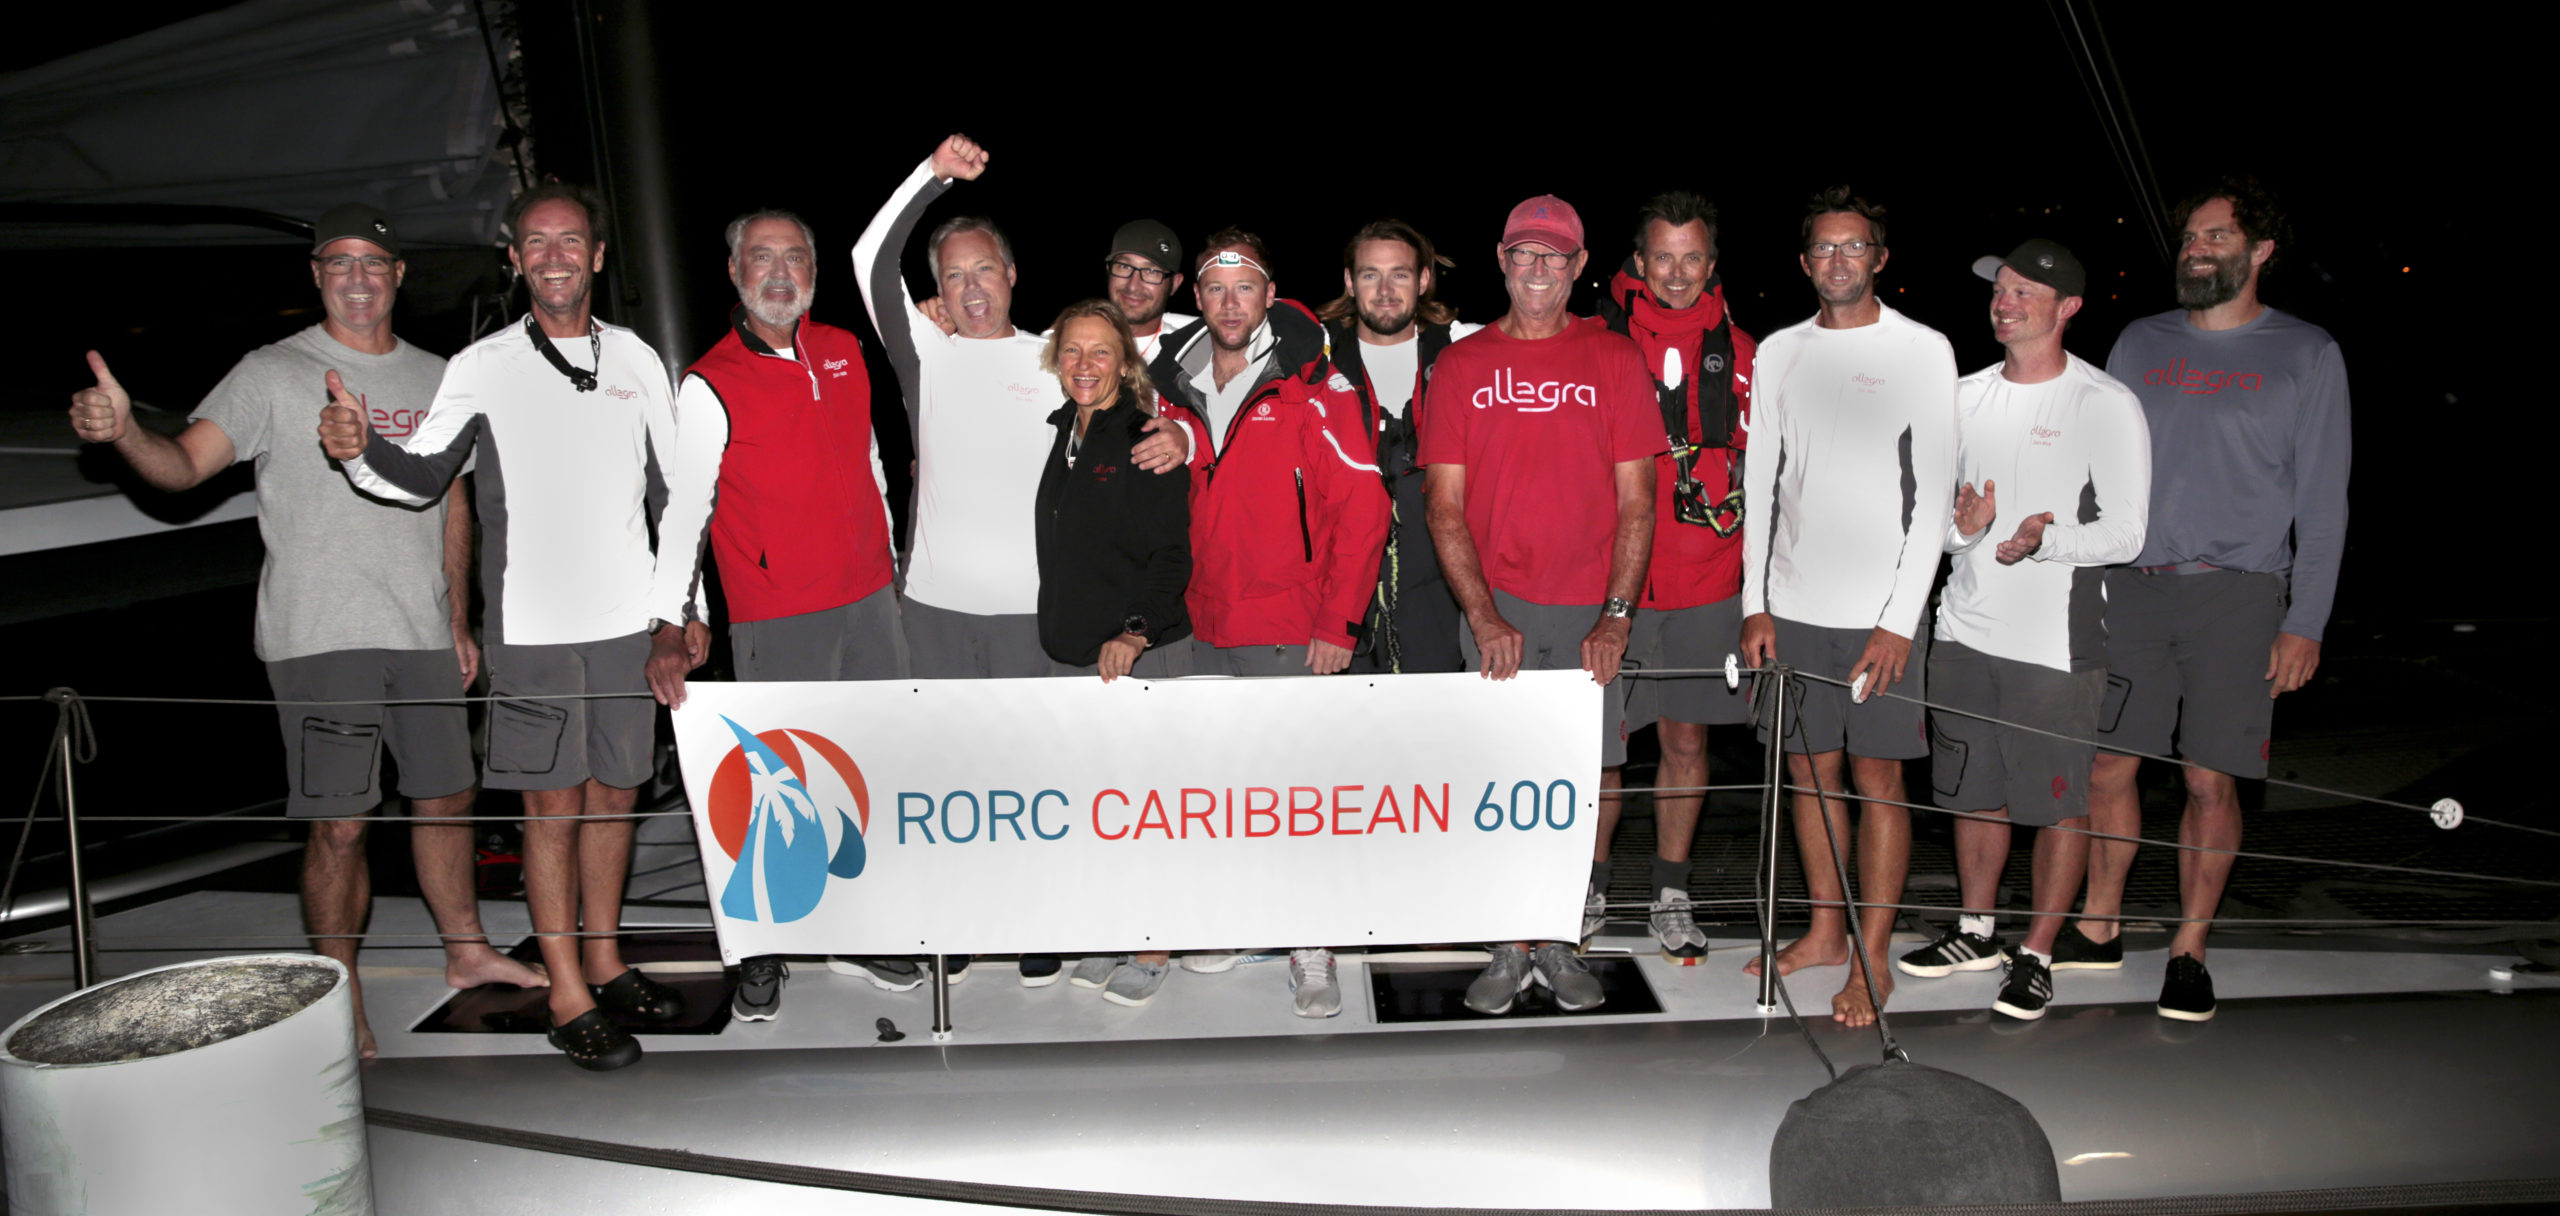 Wainscott’s Adrian Keller, in the red vest, and North Haven's Fred Stelle, in the red shirt, holding the RORC Caribbean 600 banner, along with the rest of their multinational crew.